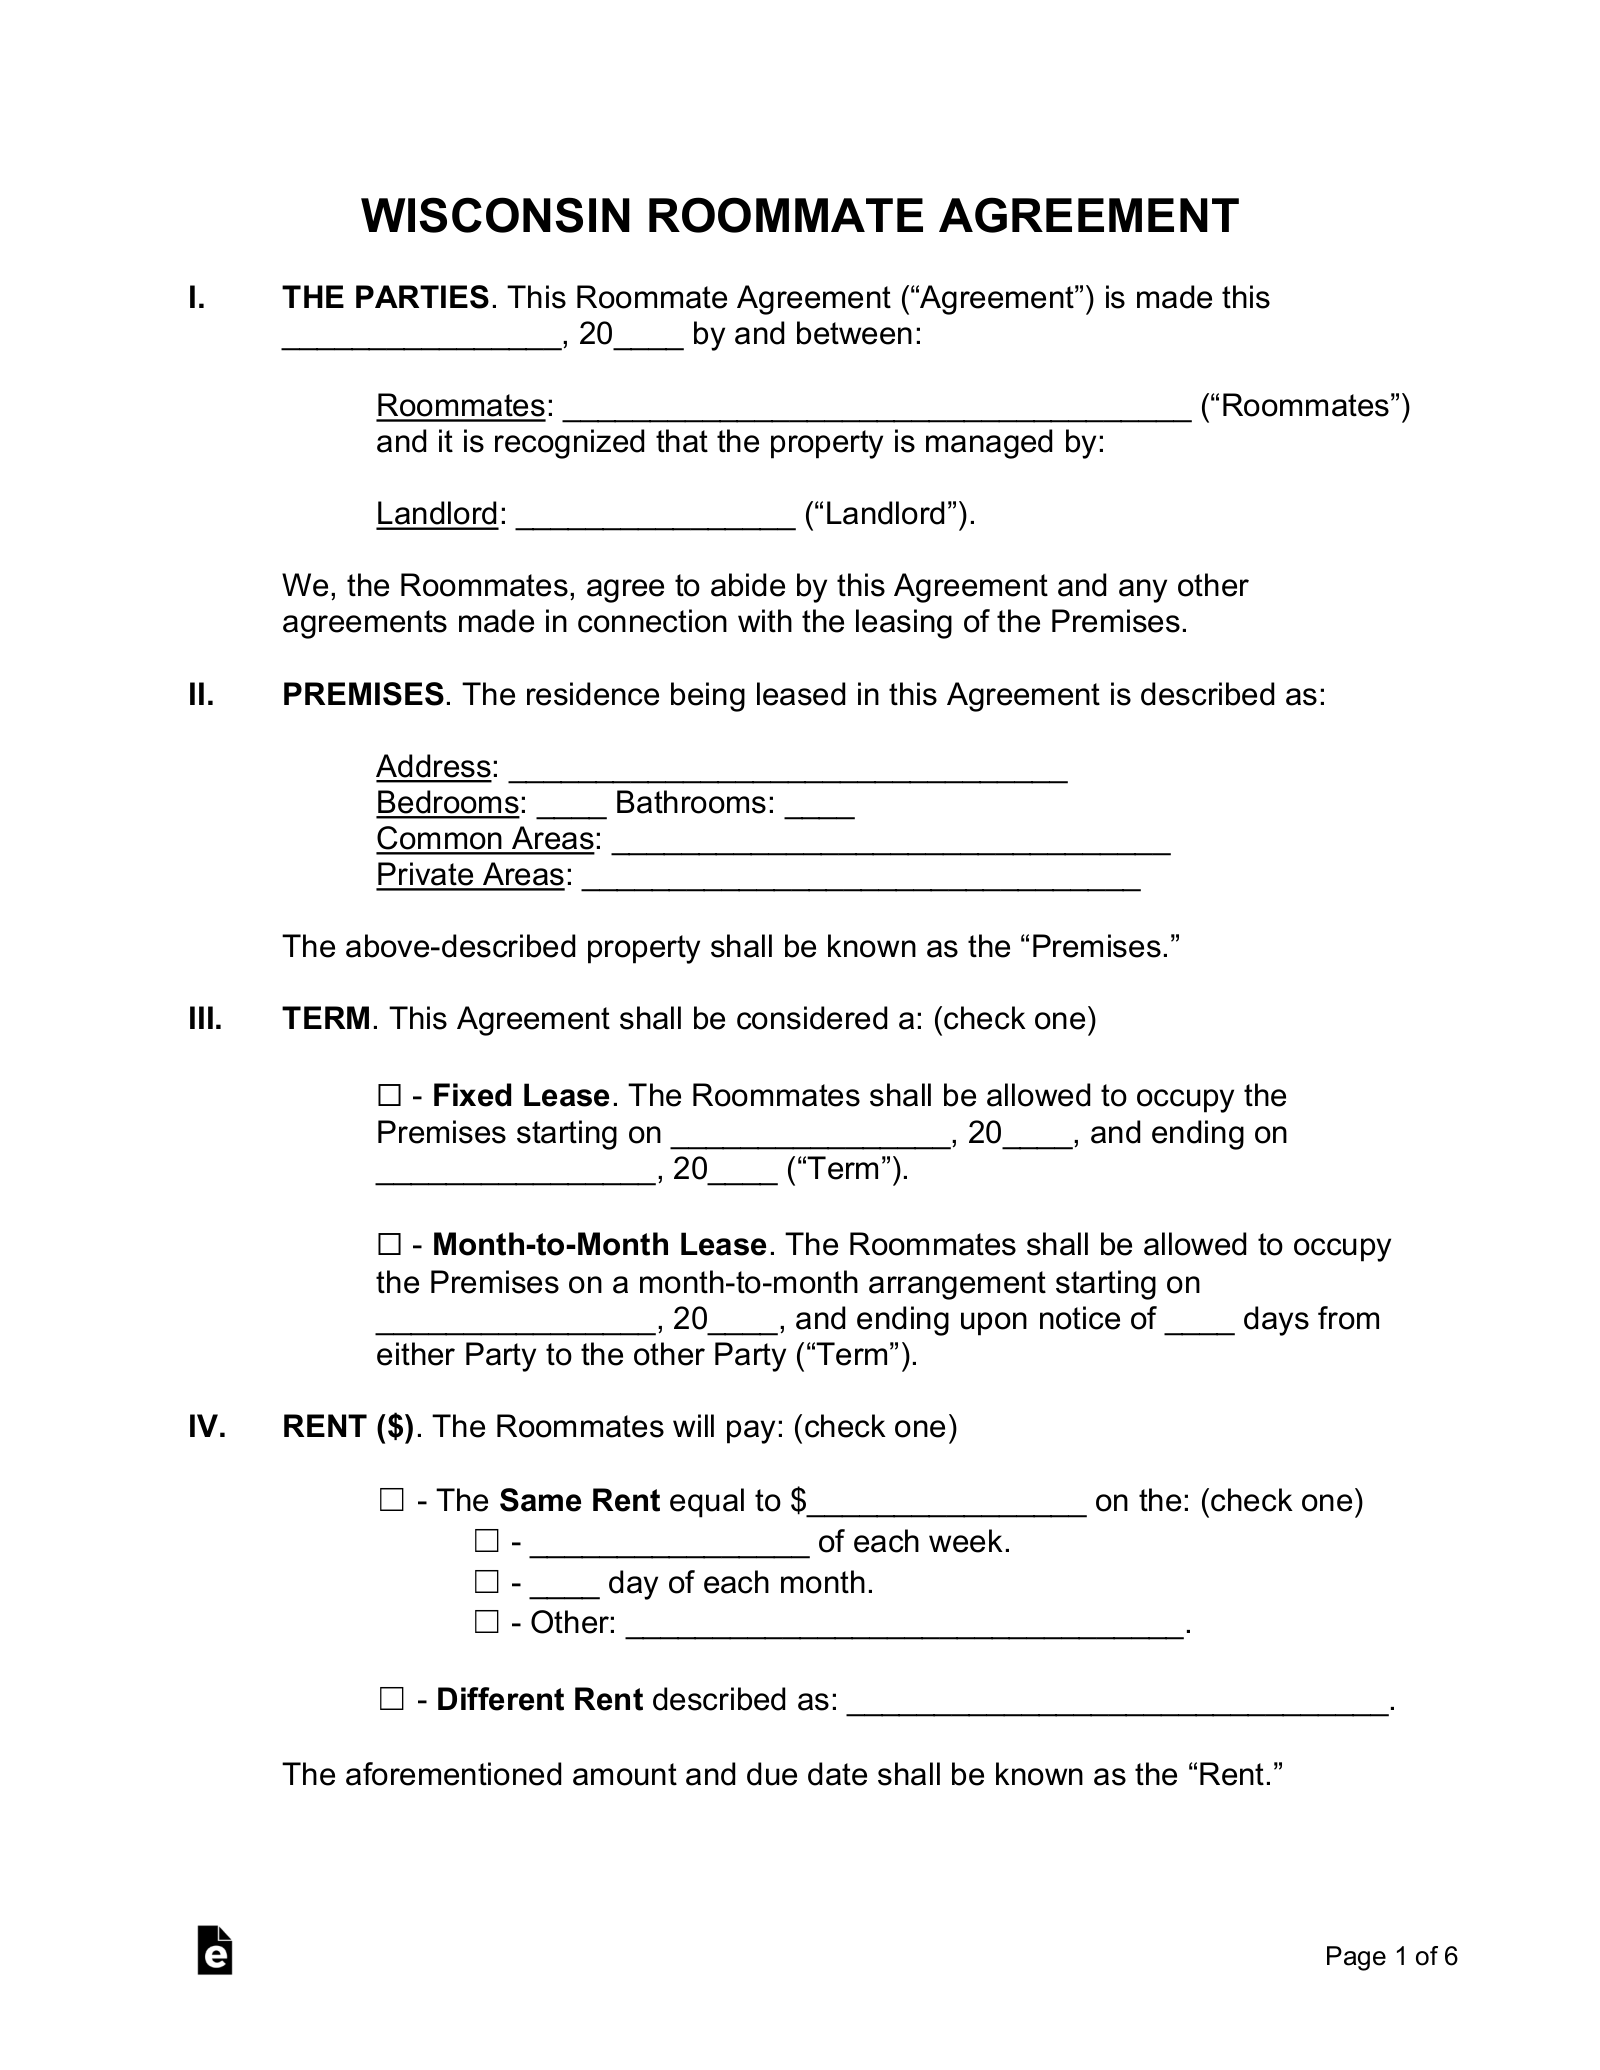 Wisconsin Roommate Agreement Form